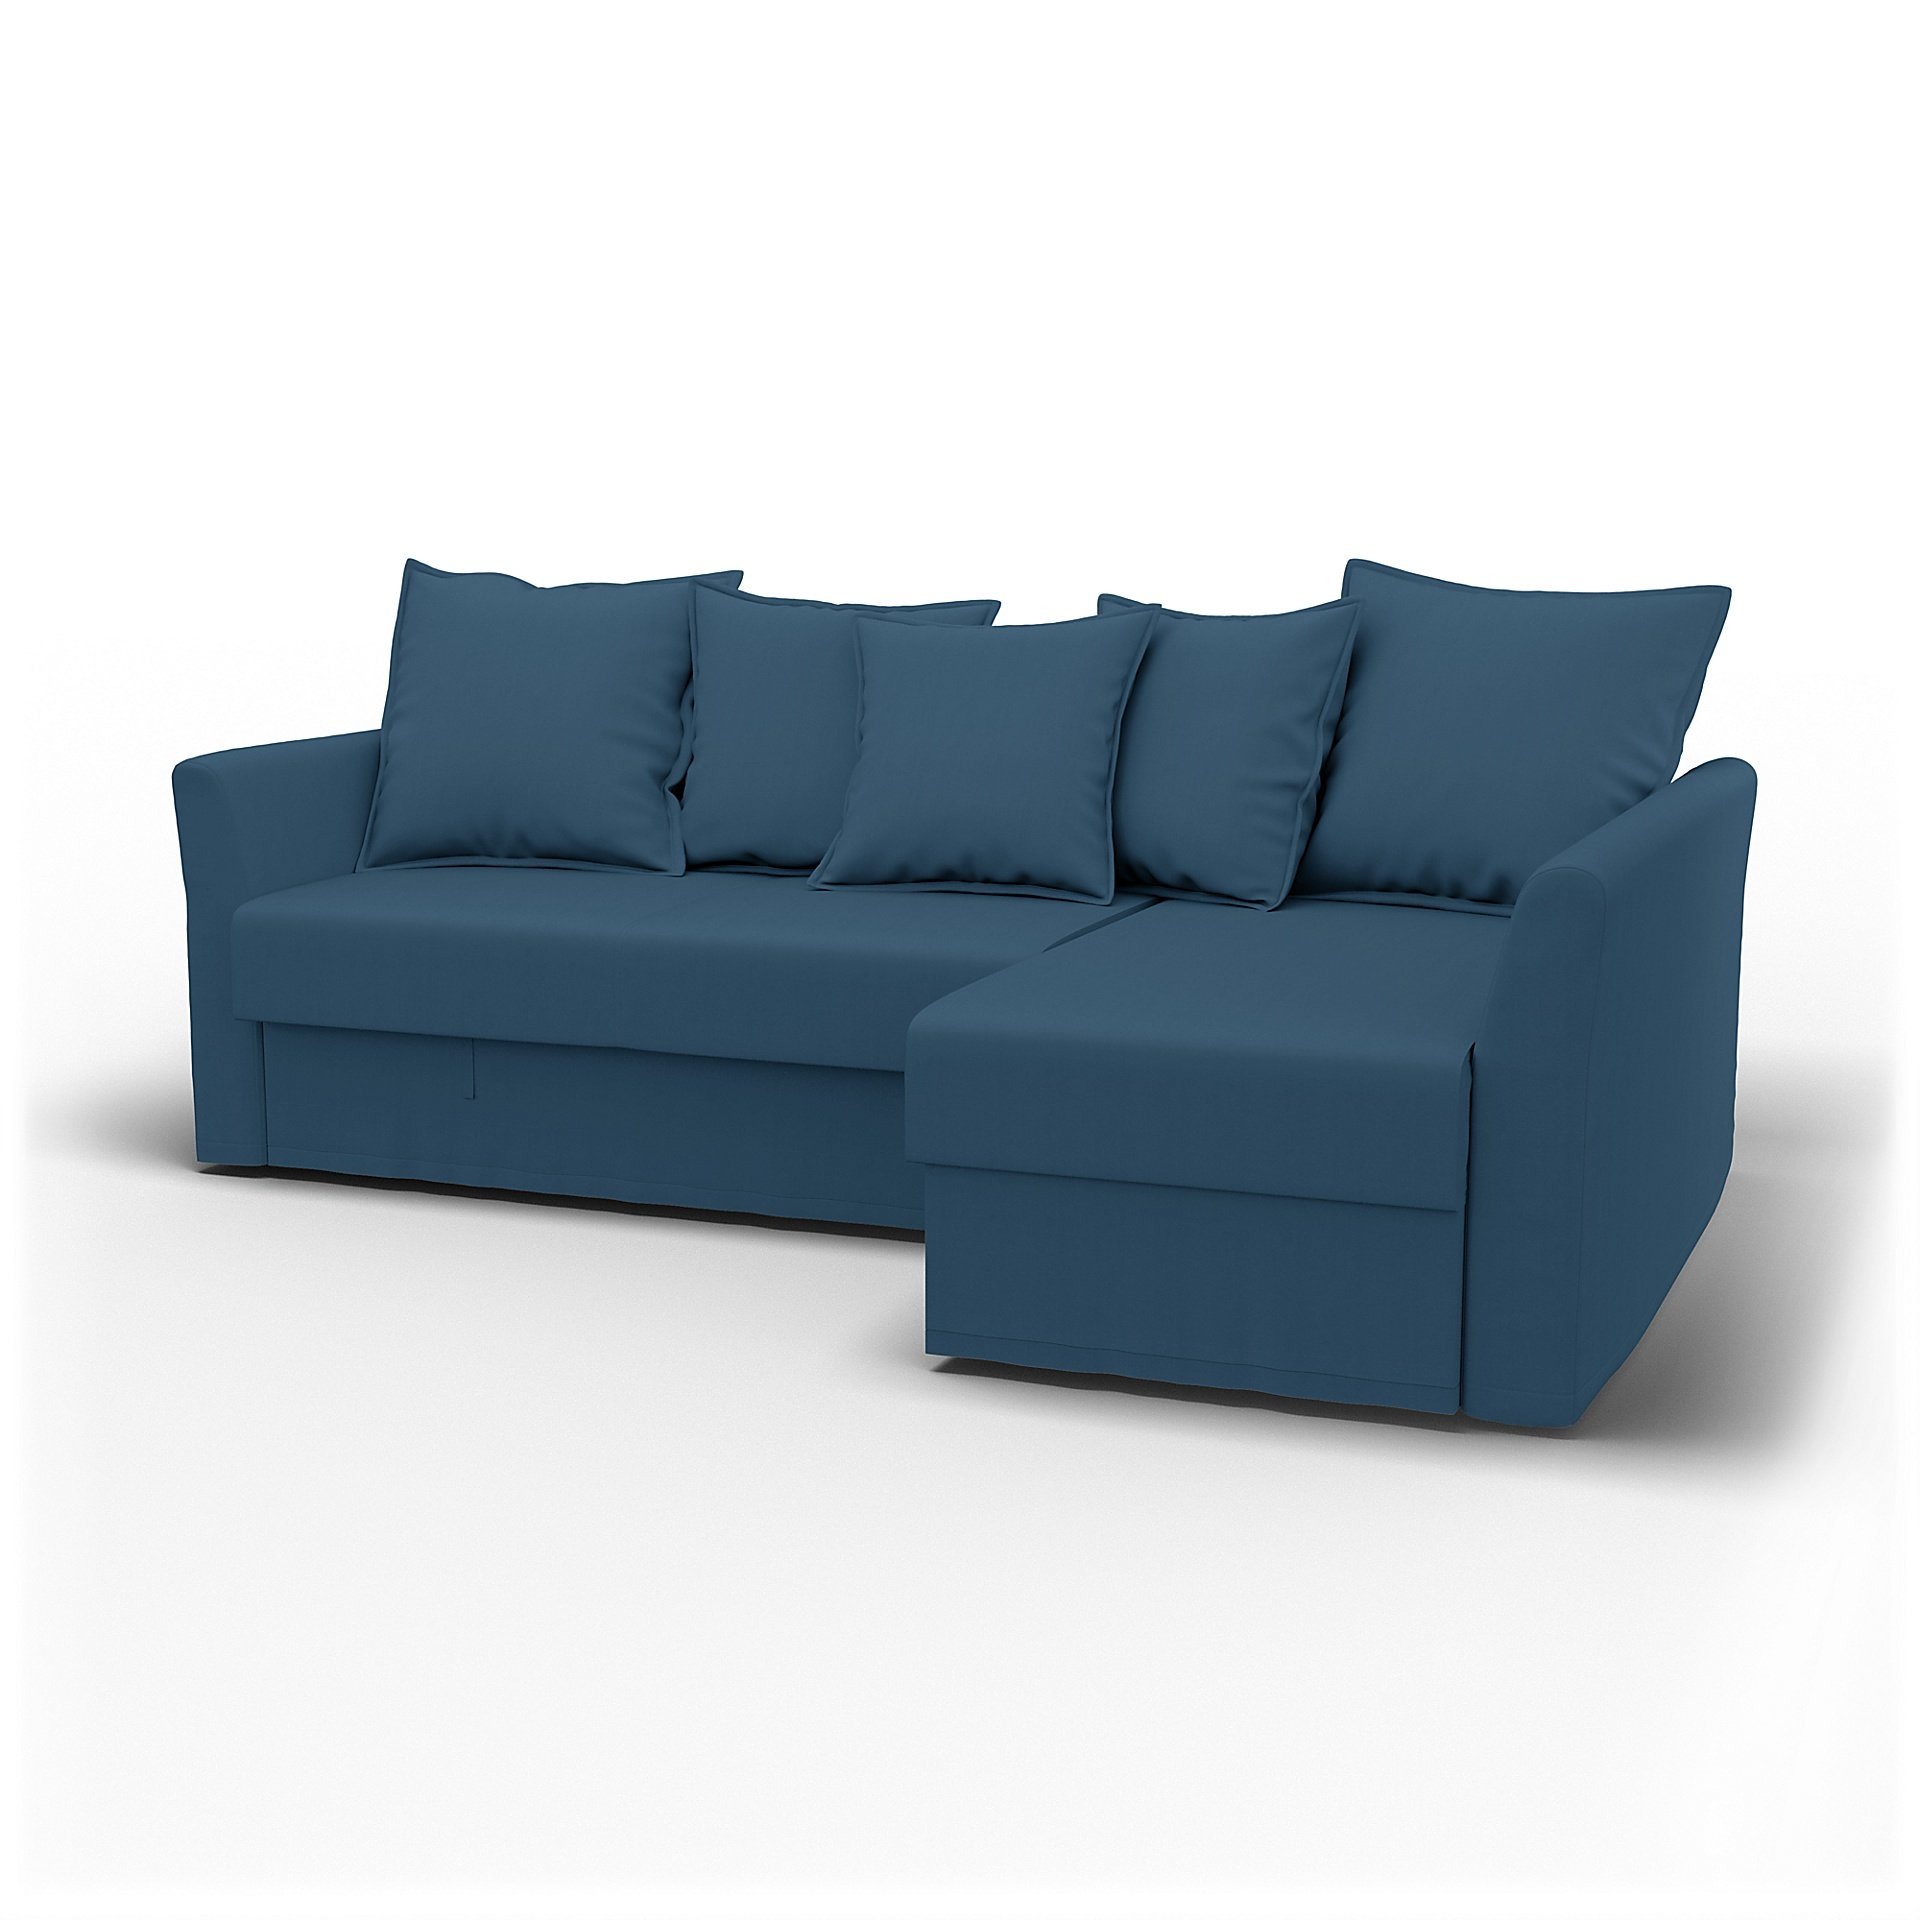 IKEA - Holmsund Sofabed with Chaiselongue, Real Teal, Cotton - Bemz